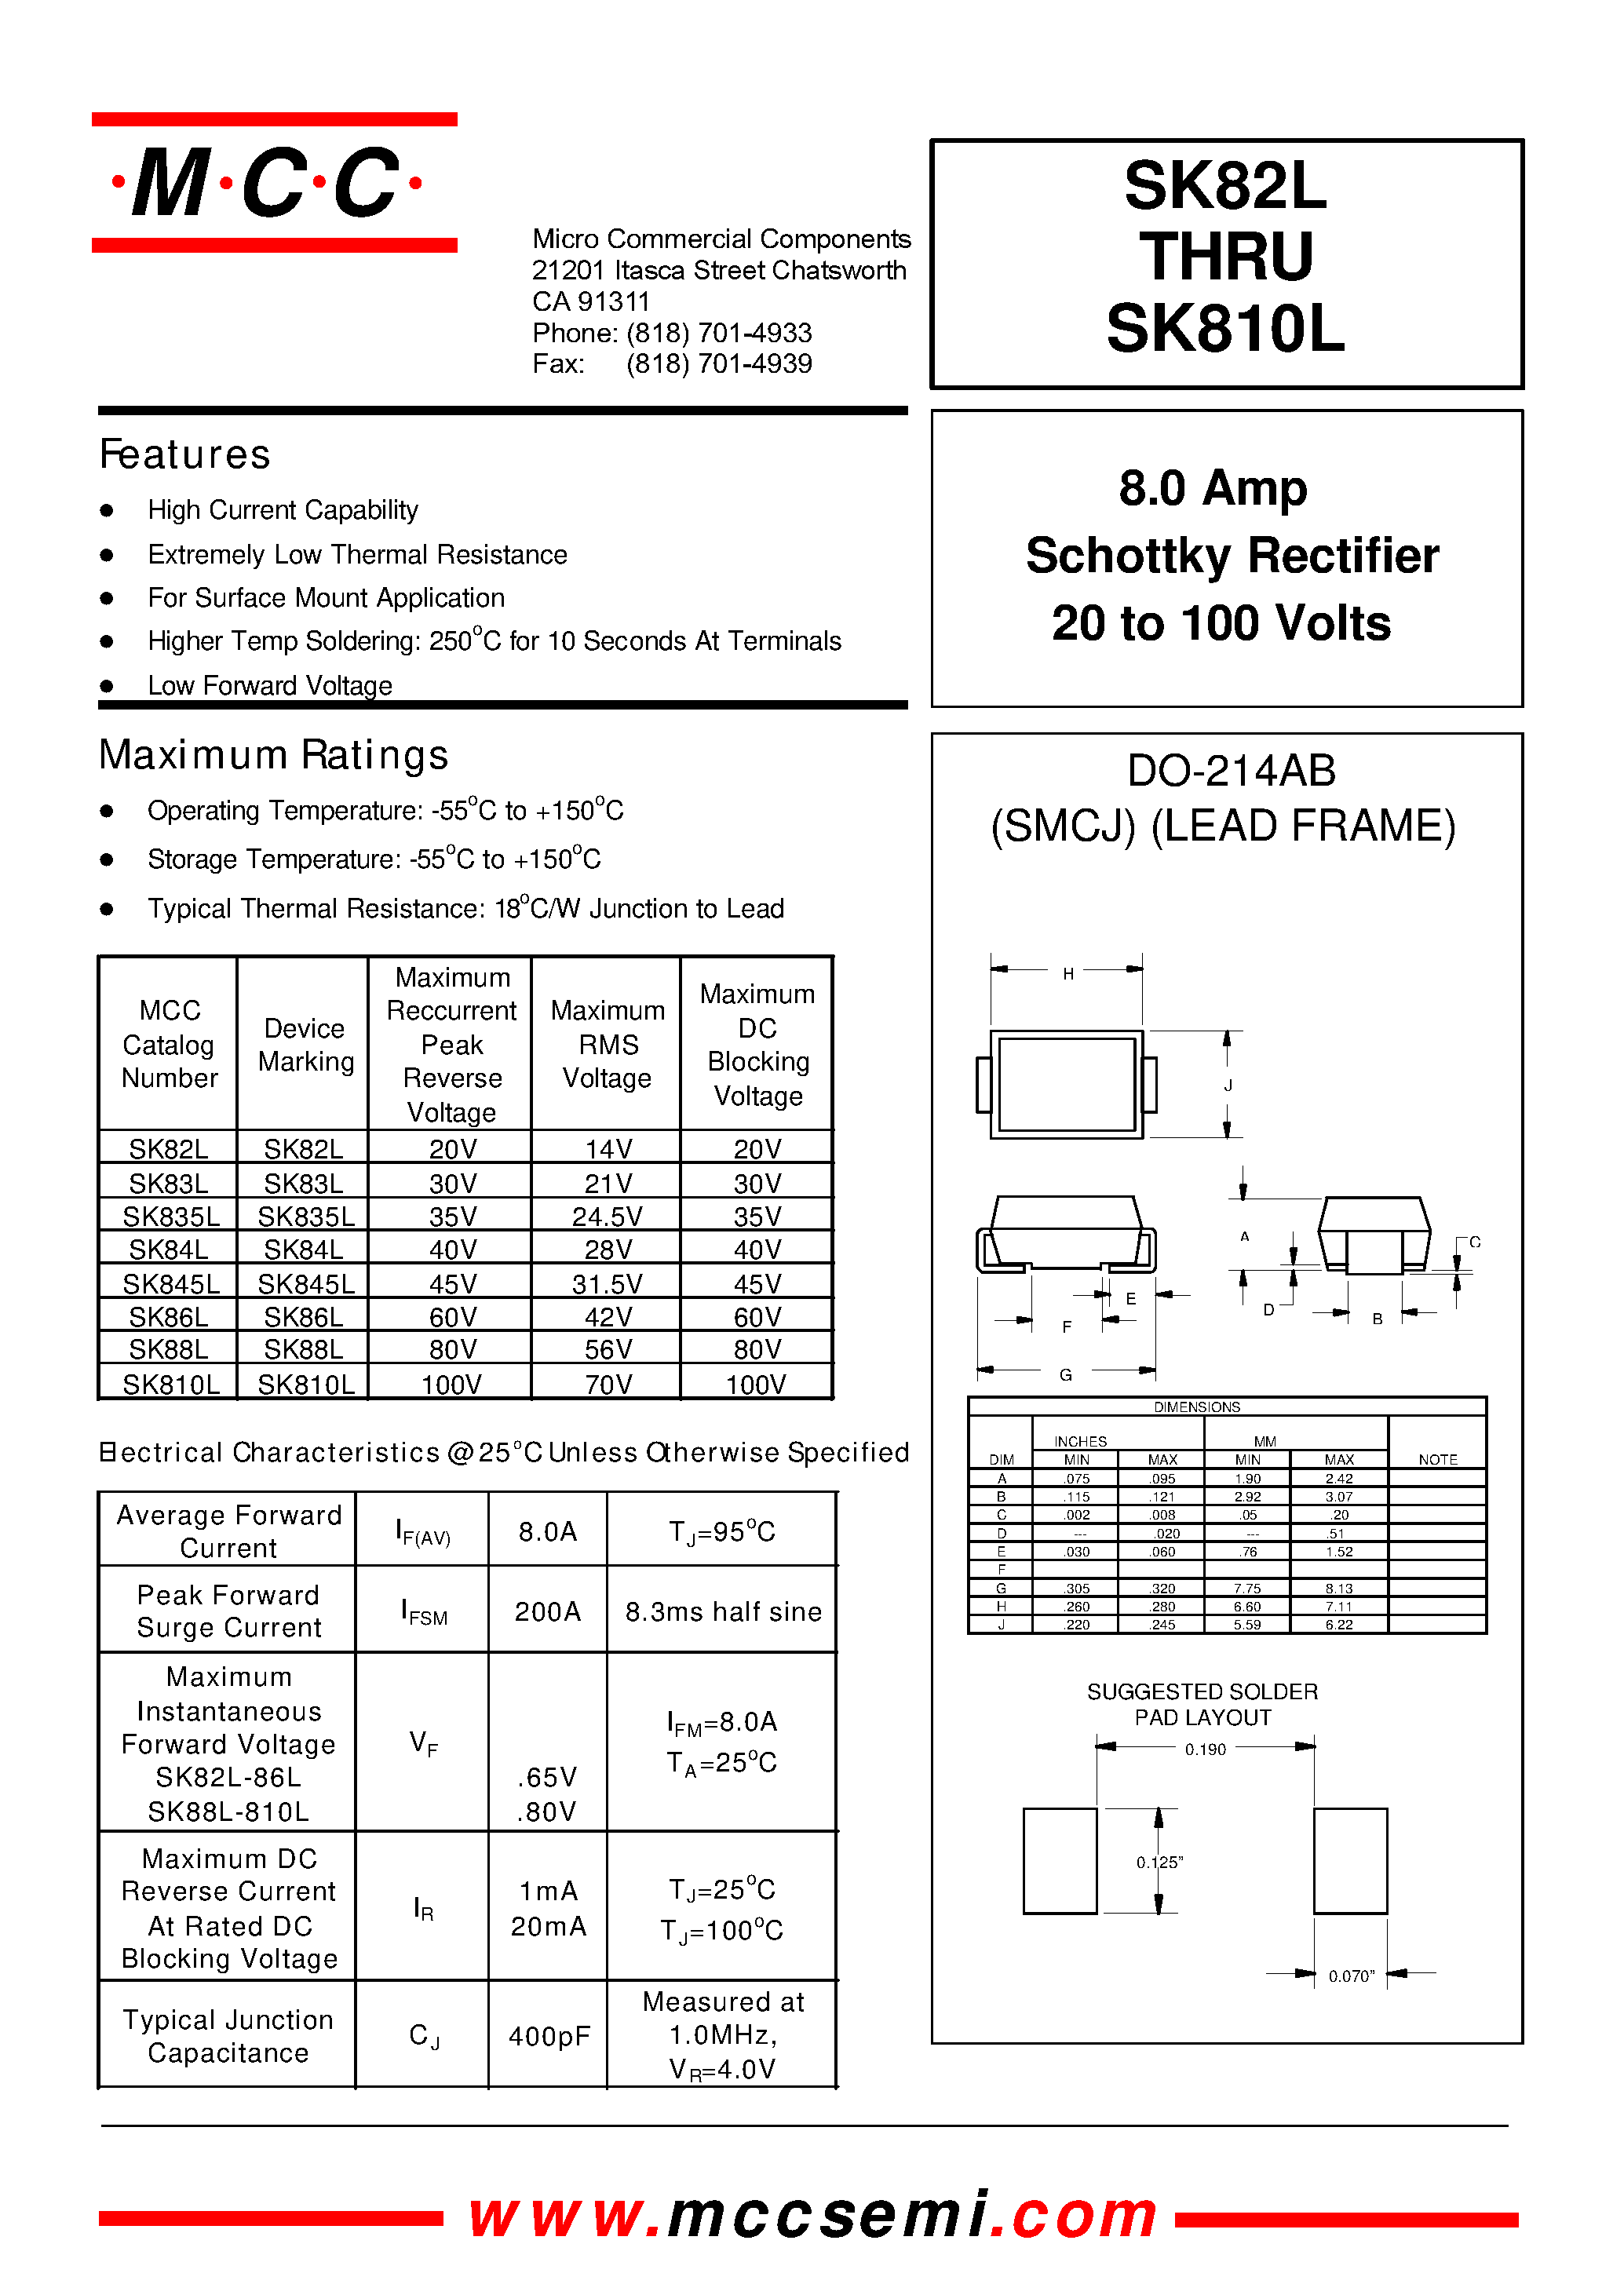 Datasheet SK88L - 8.0 Amp Schottky Rectifier 20 to 100 Volts page 1